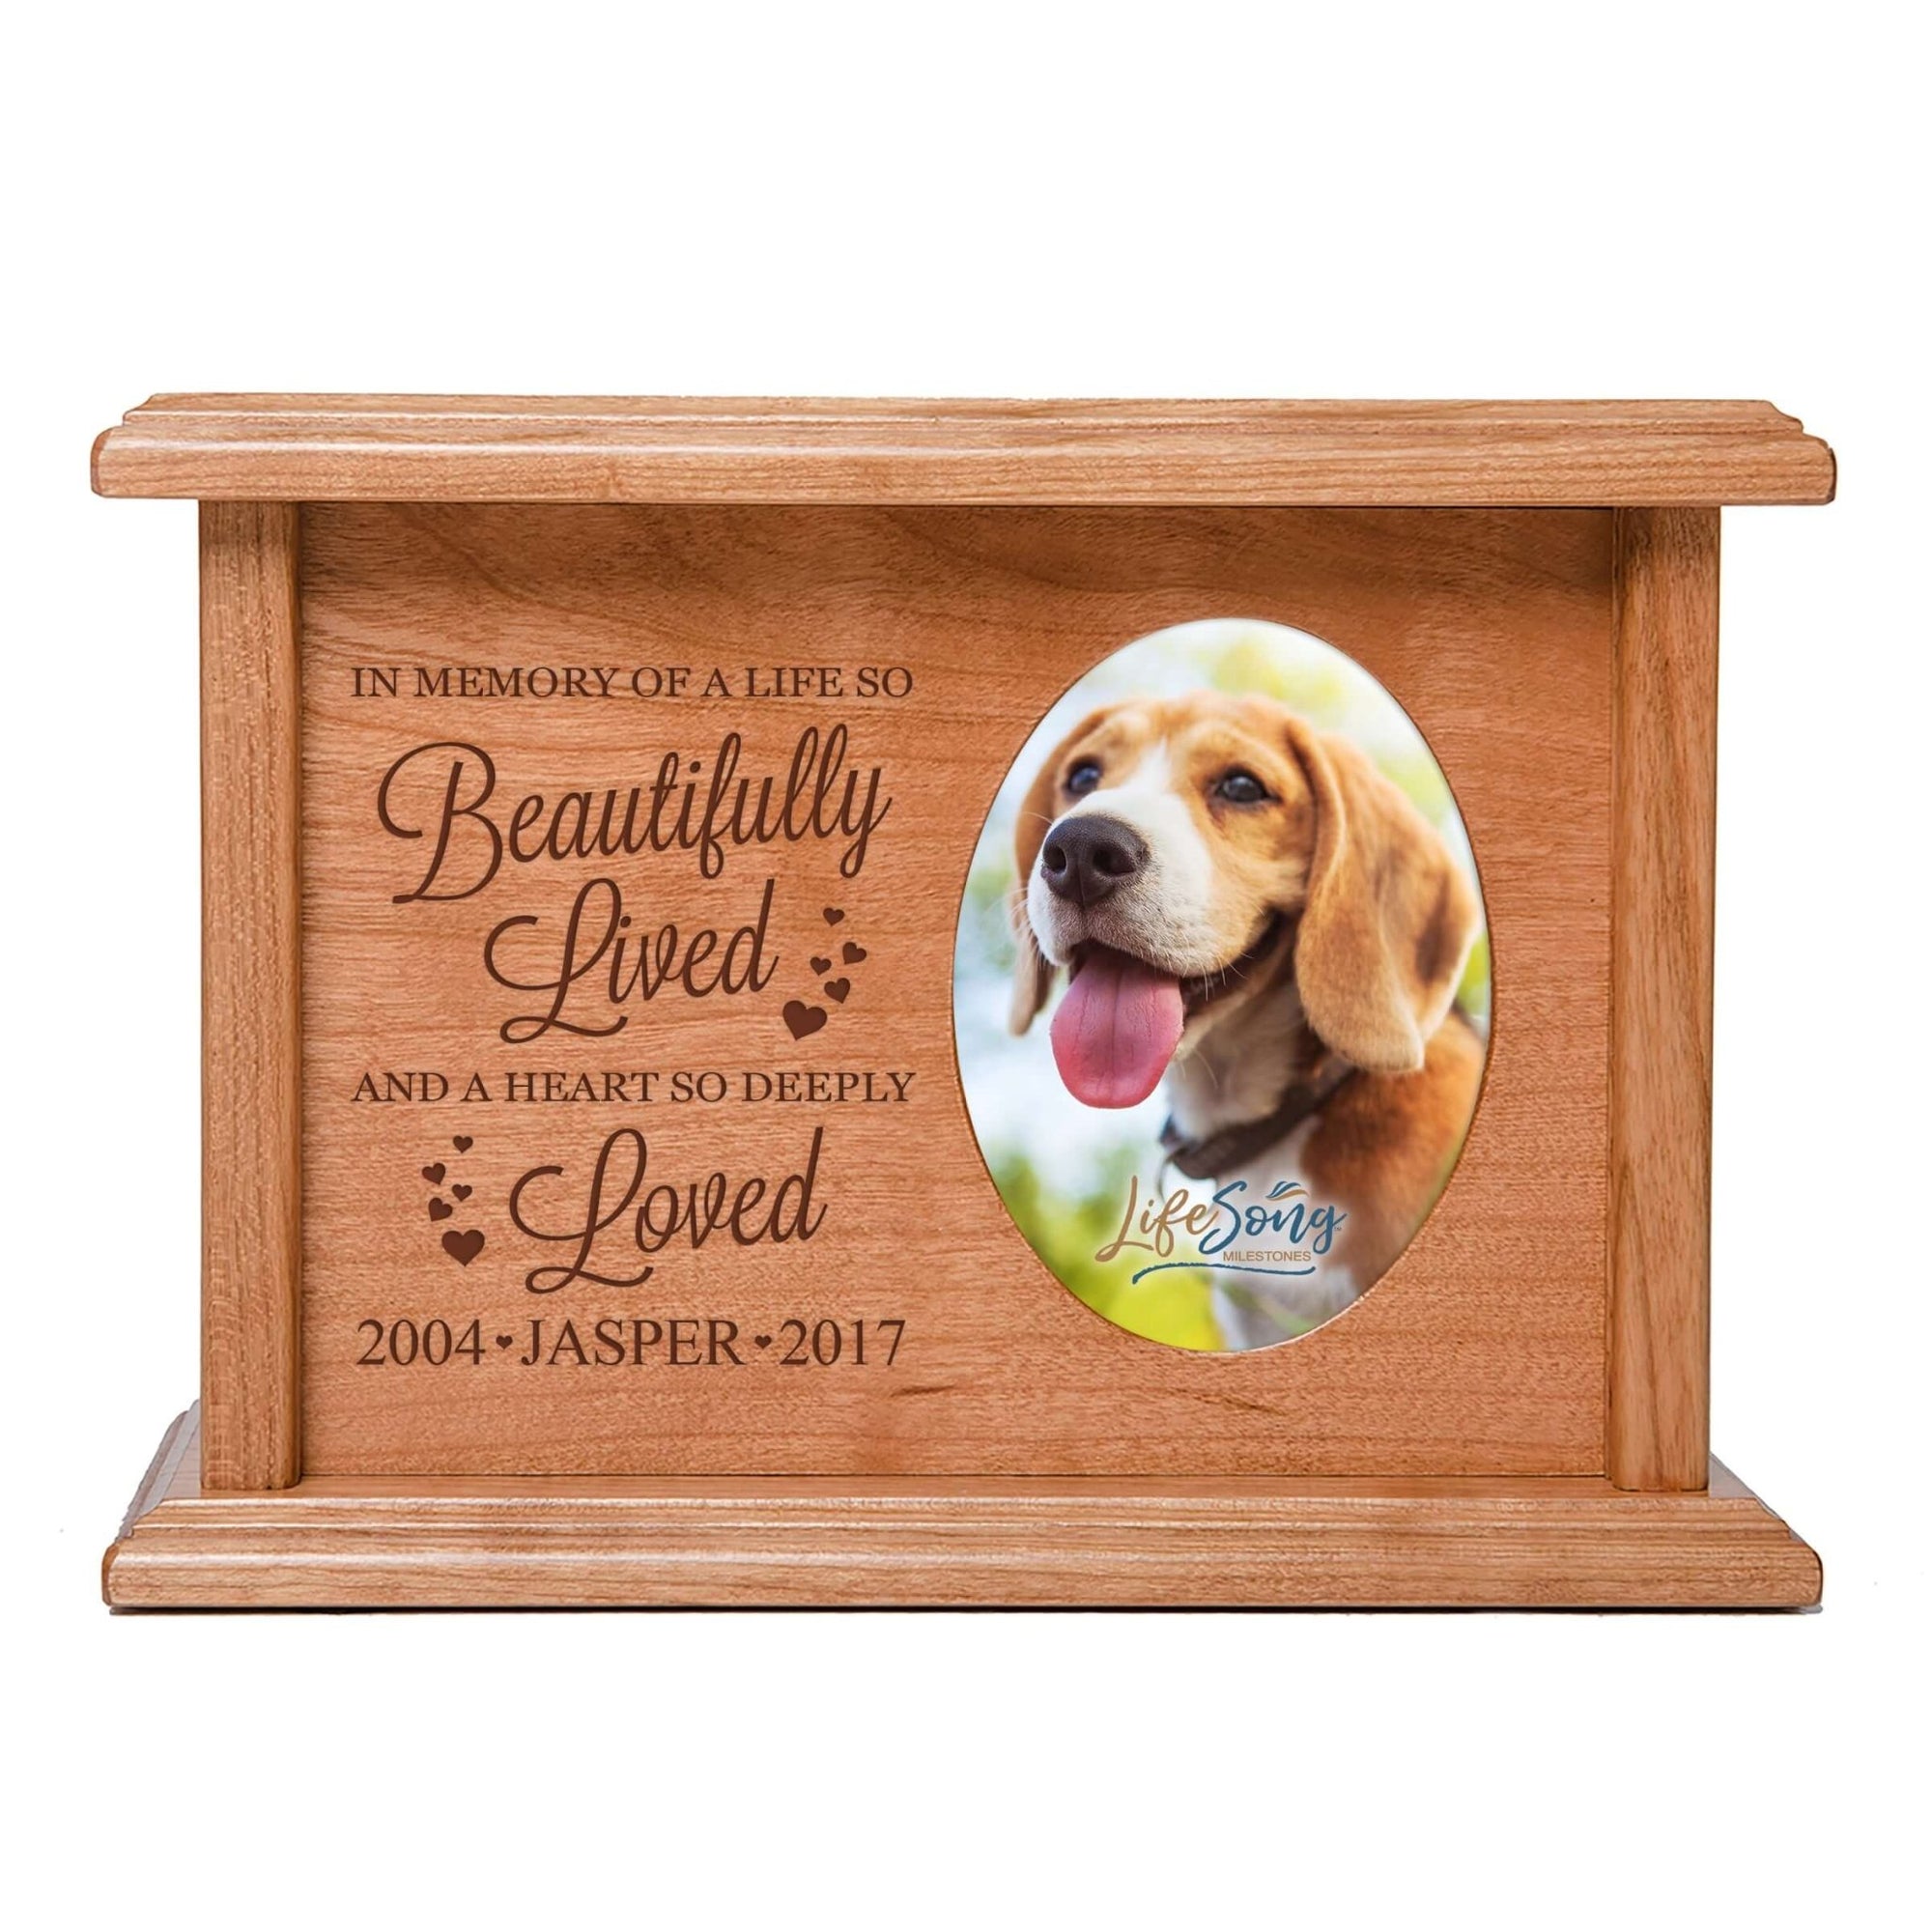 Pet Memorial Picture Cremation Urn Box for Dog or Cat - In Memory Of A Life So Beautifully Lived - LifeSong Milestones